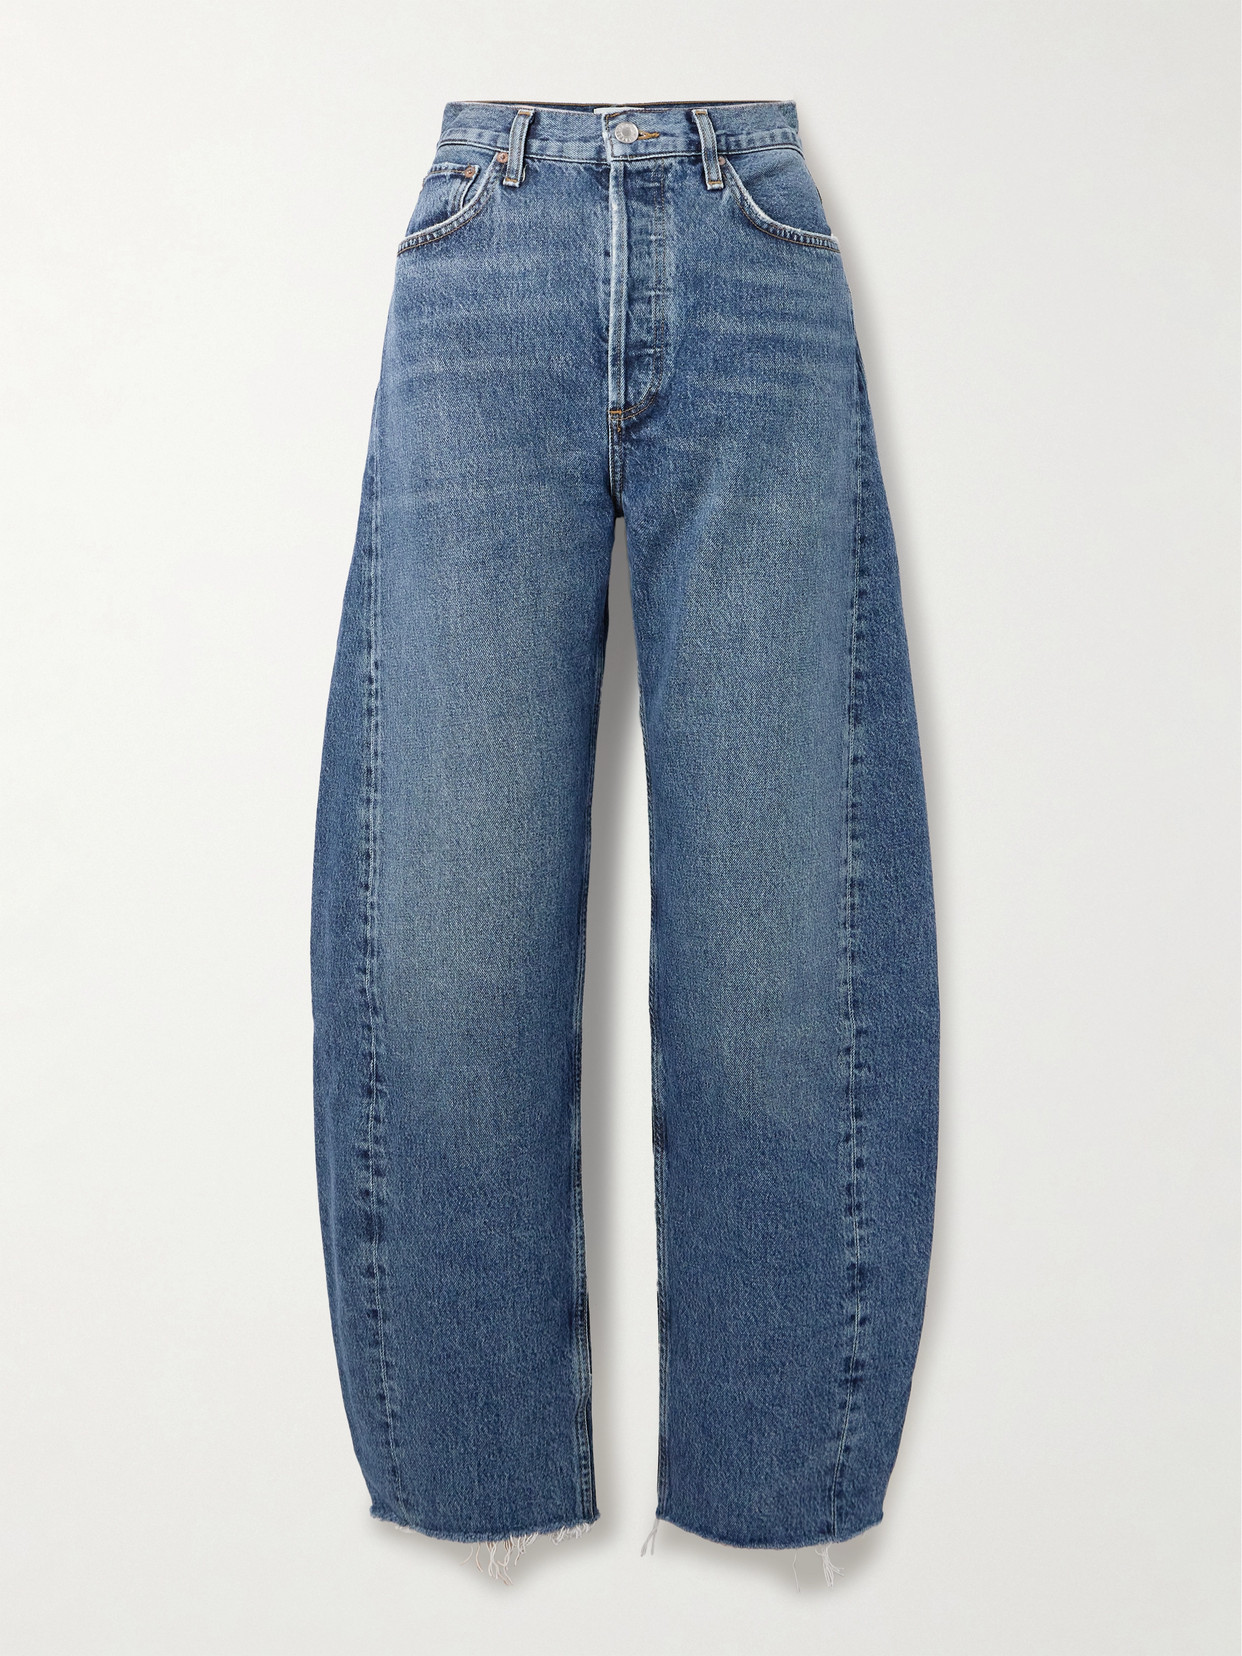 + Net Sustain Luna Cropped High-Rise Tapered Organic Jeans